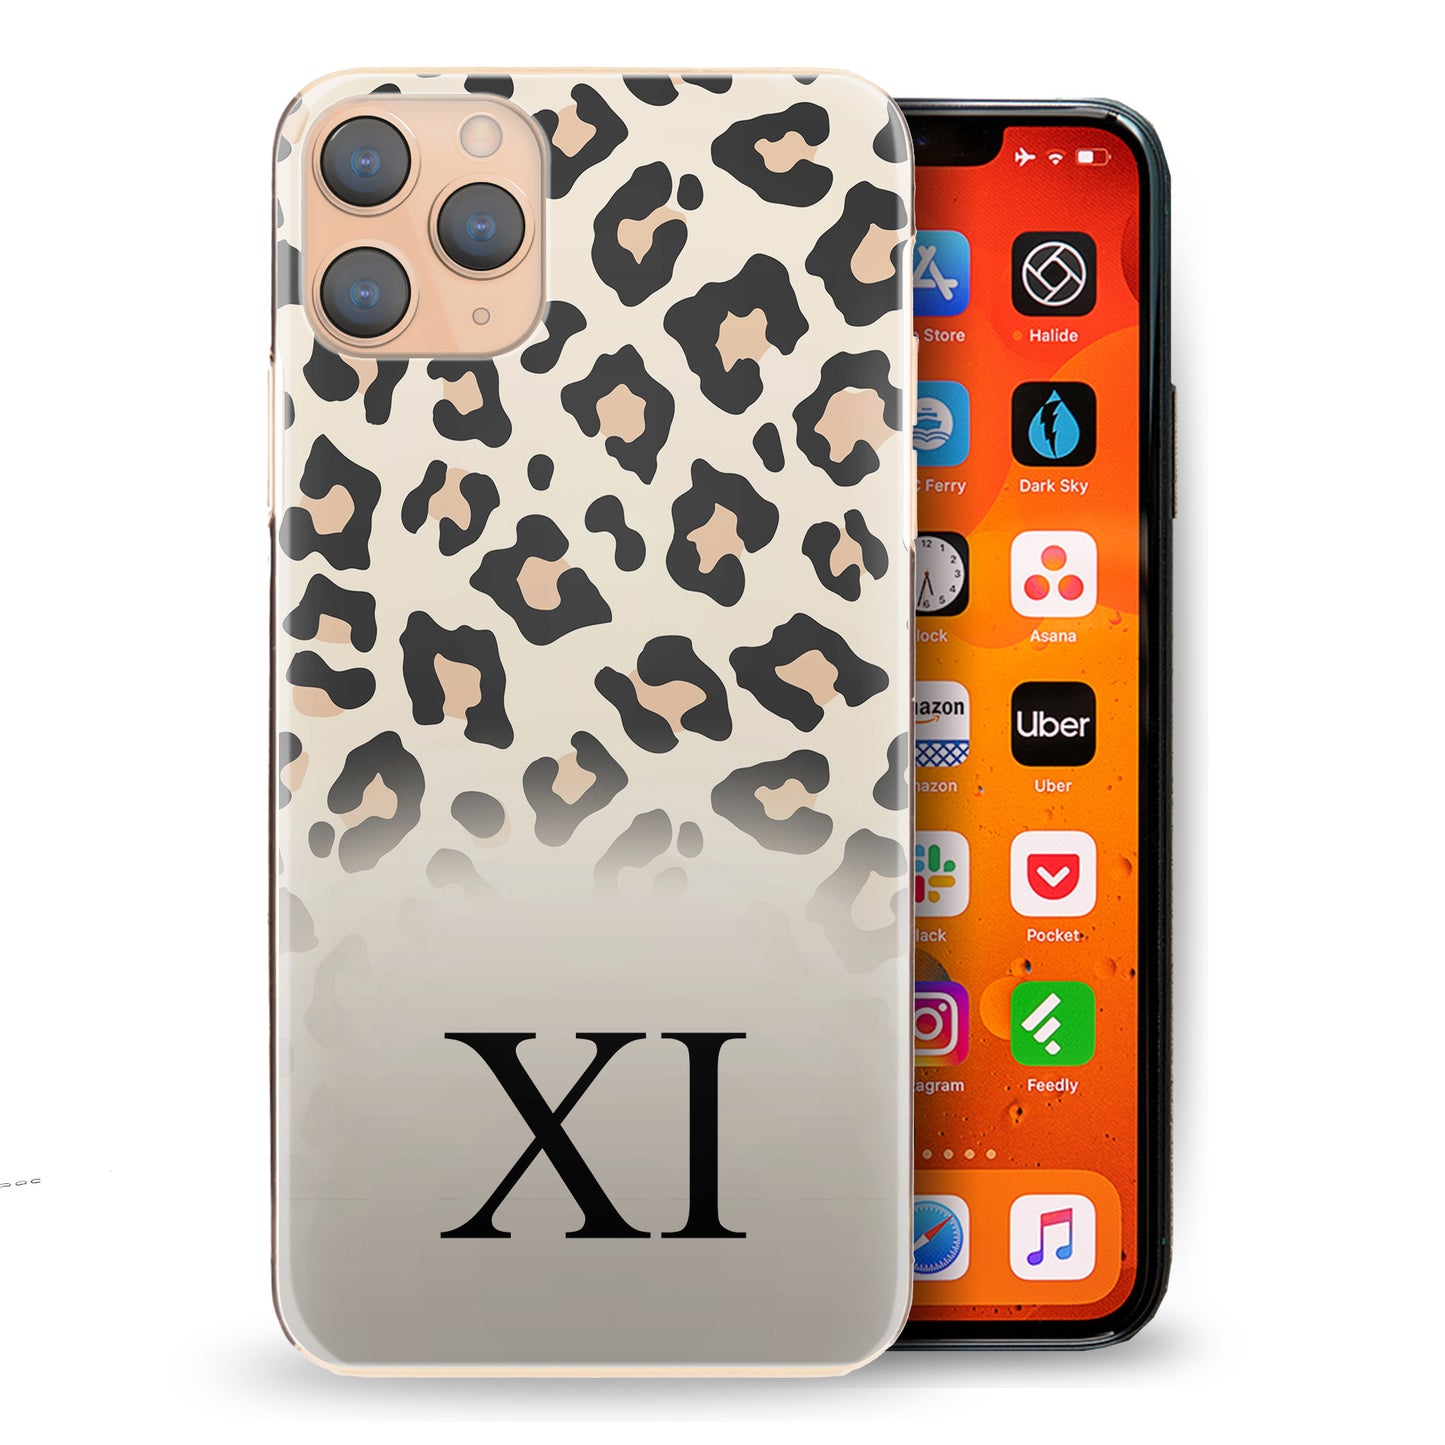 Personalised Nokia Phone Hard Case Black Initial on White Leopard Print